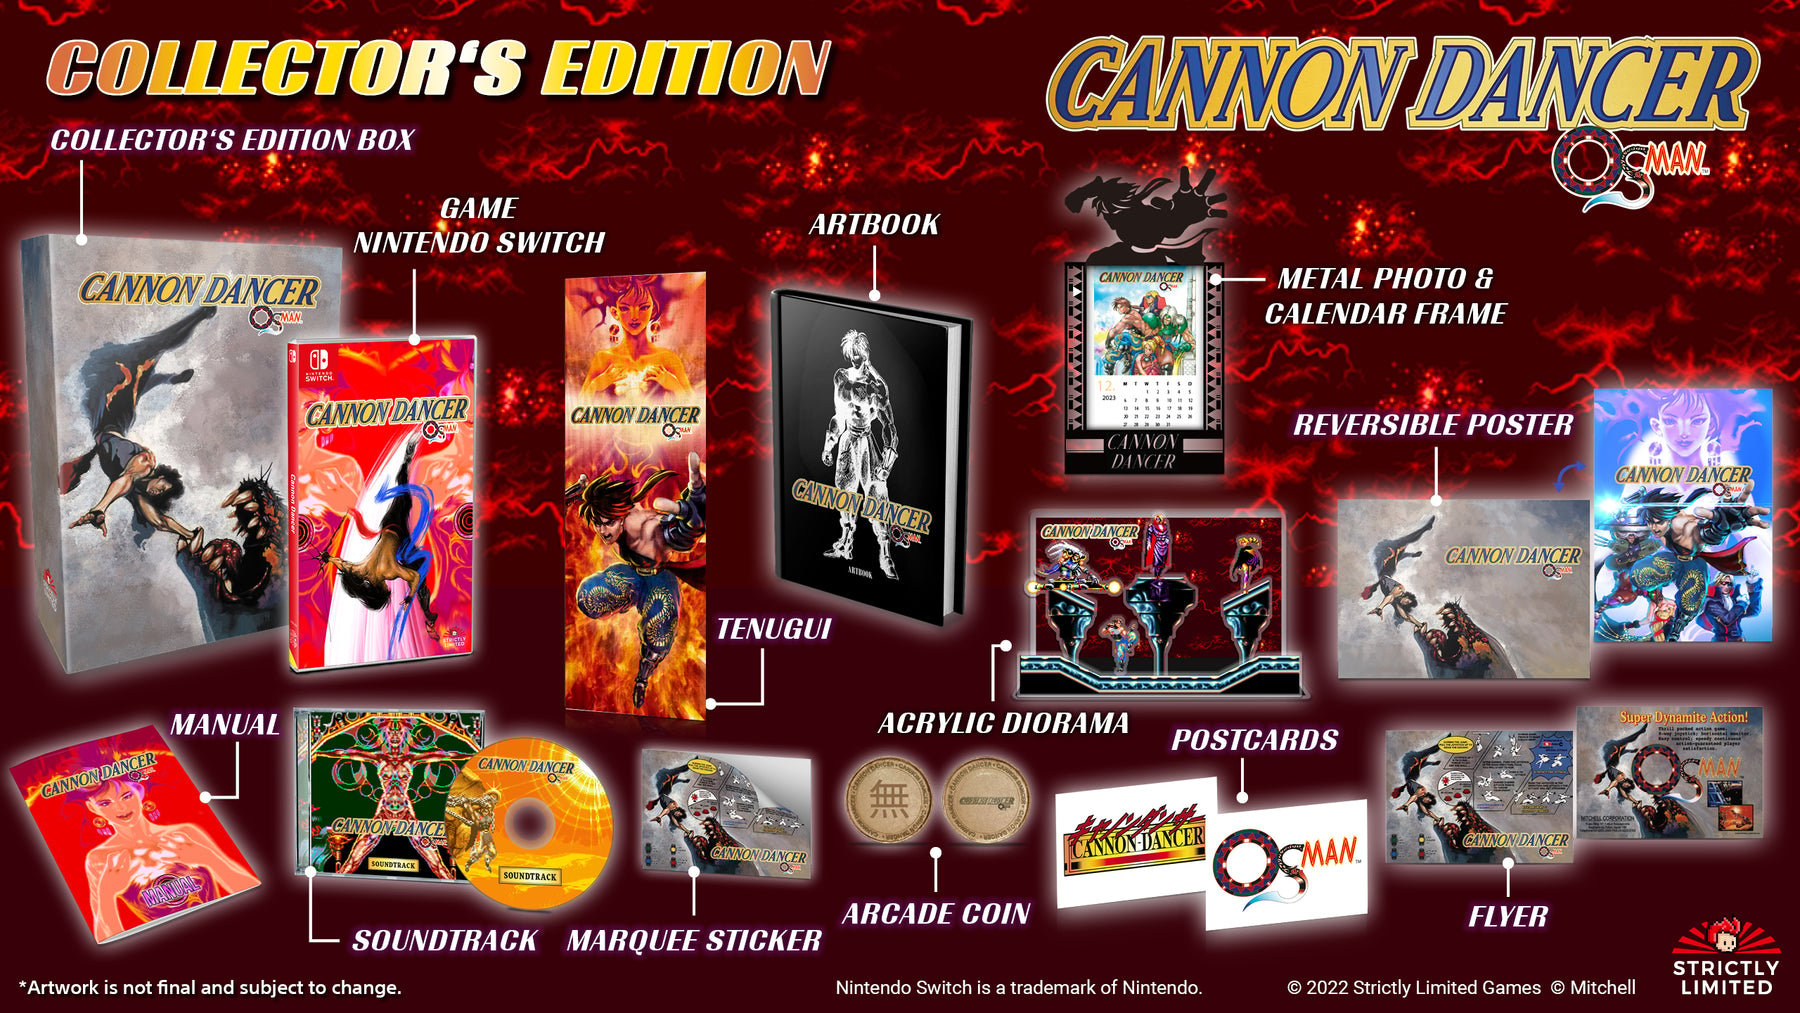 Cannon Dancer (Osman) Collectors Edition - (Strictly Limited Games)